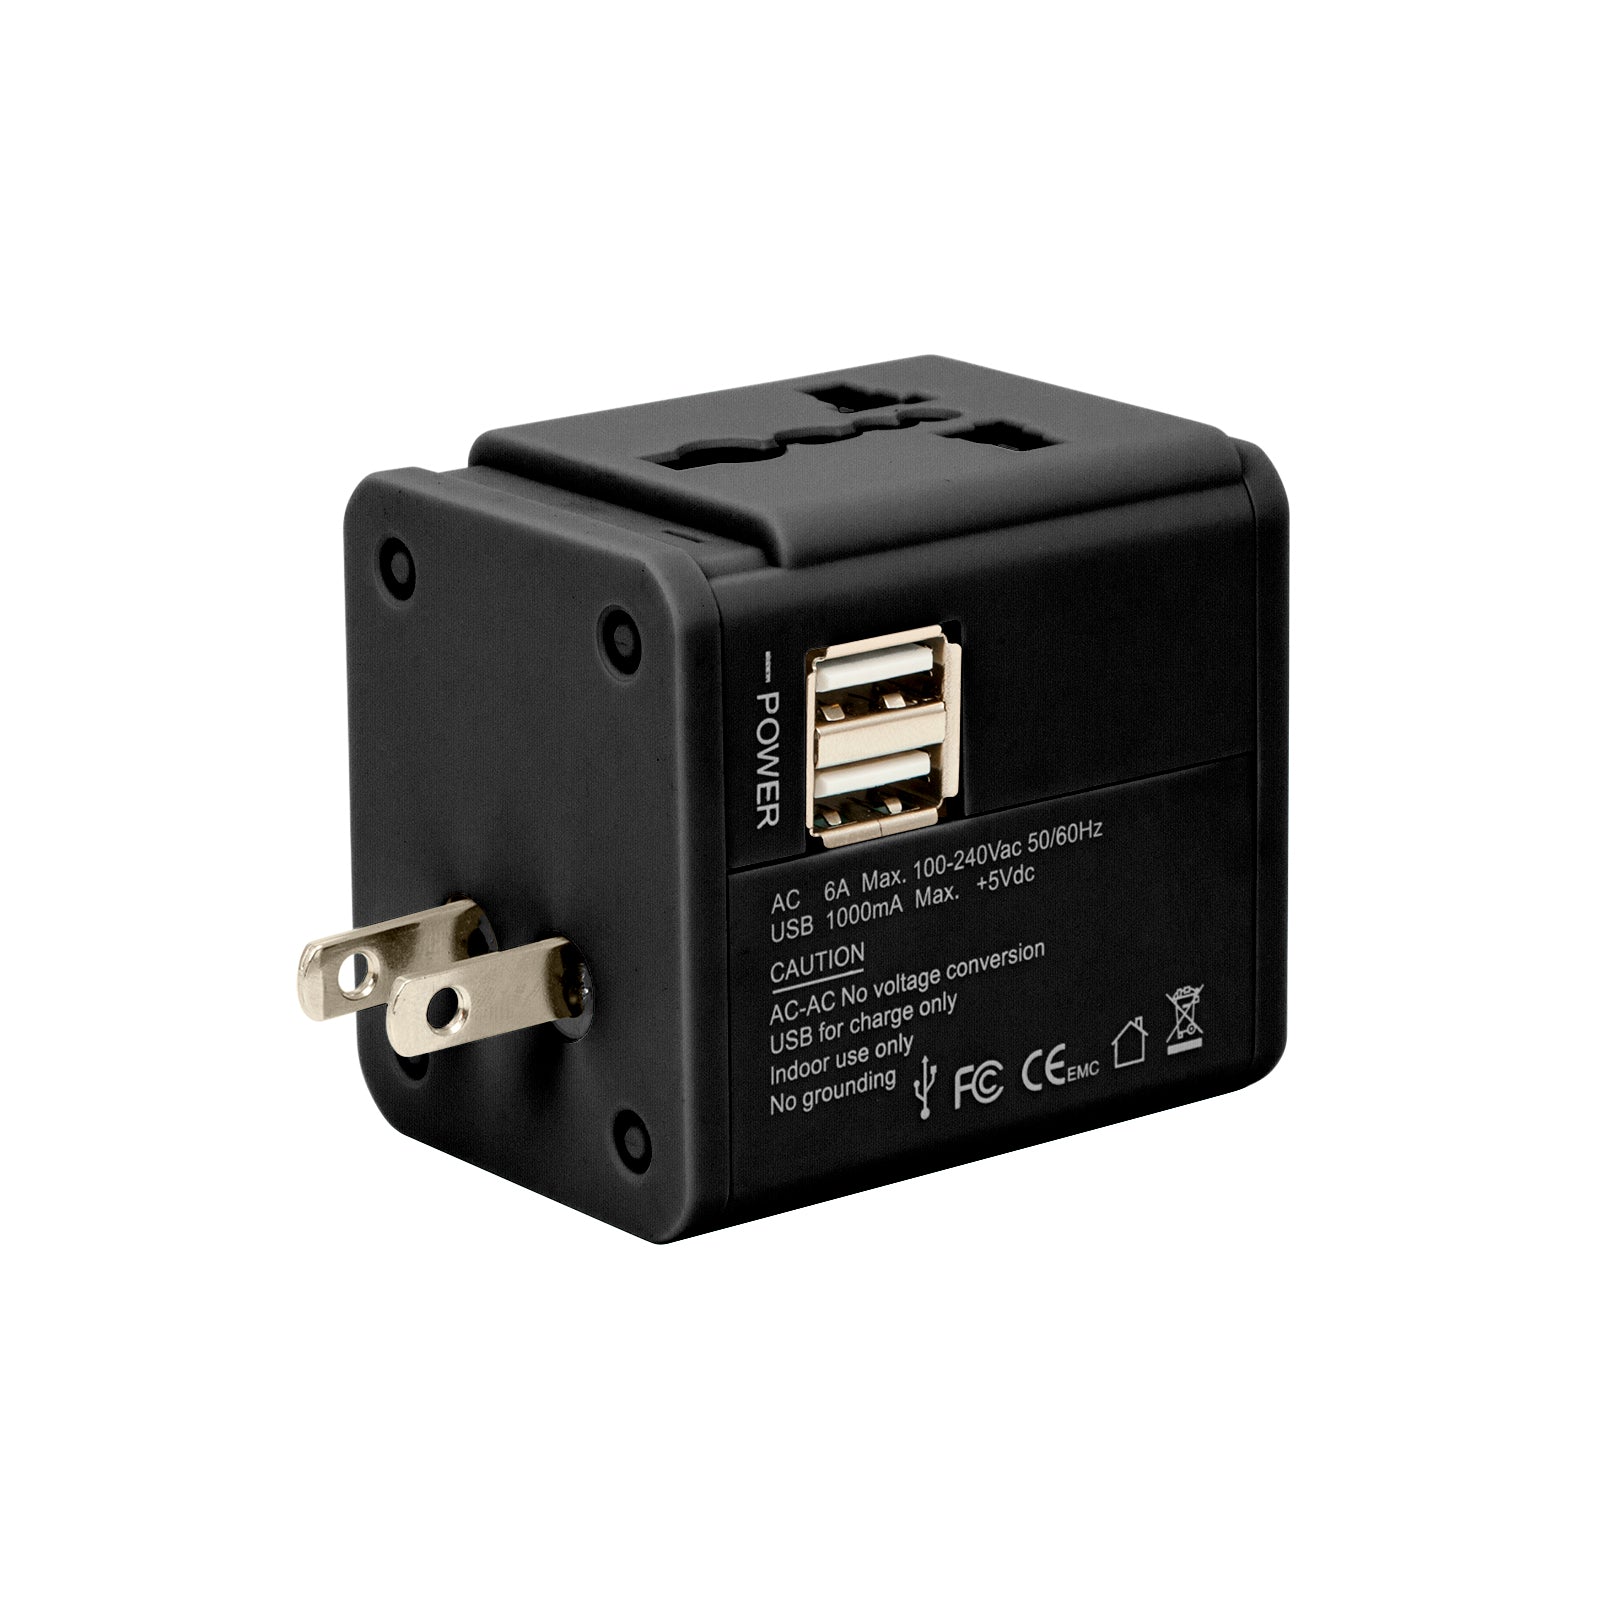 Universal Travel Adapter | Built-in Dual USB Charger | Universal Plug Adapter